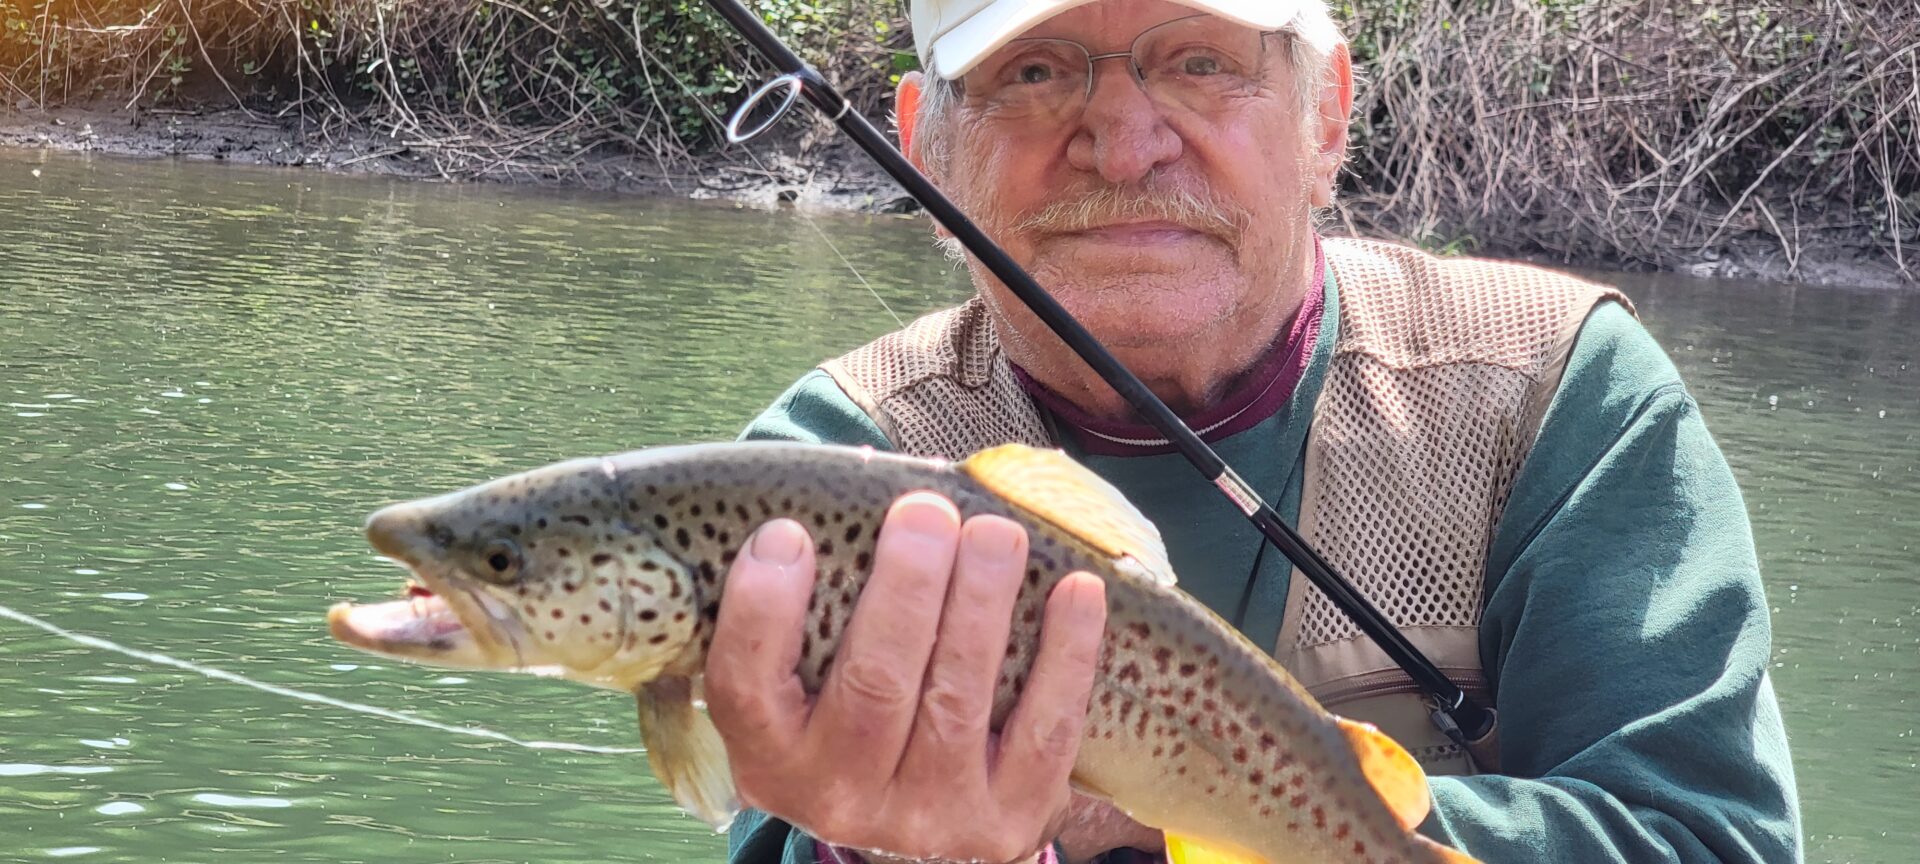 Fred Hollar with Fresh Caught Brown Trout from Pine Creek